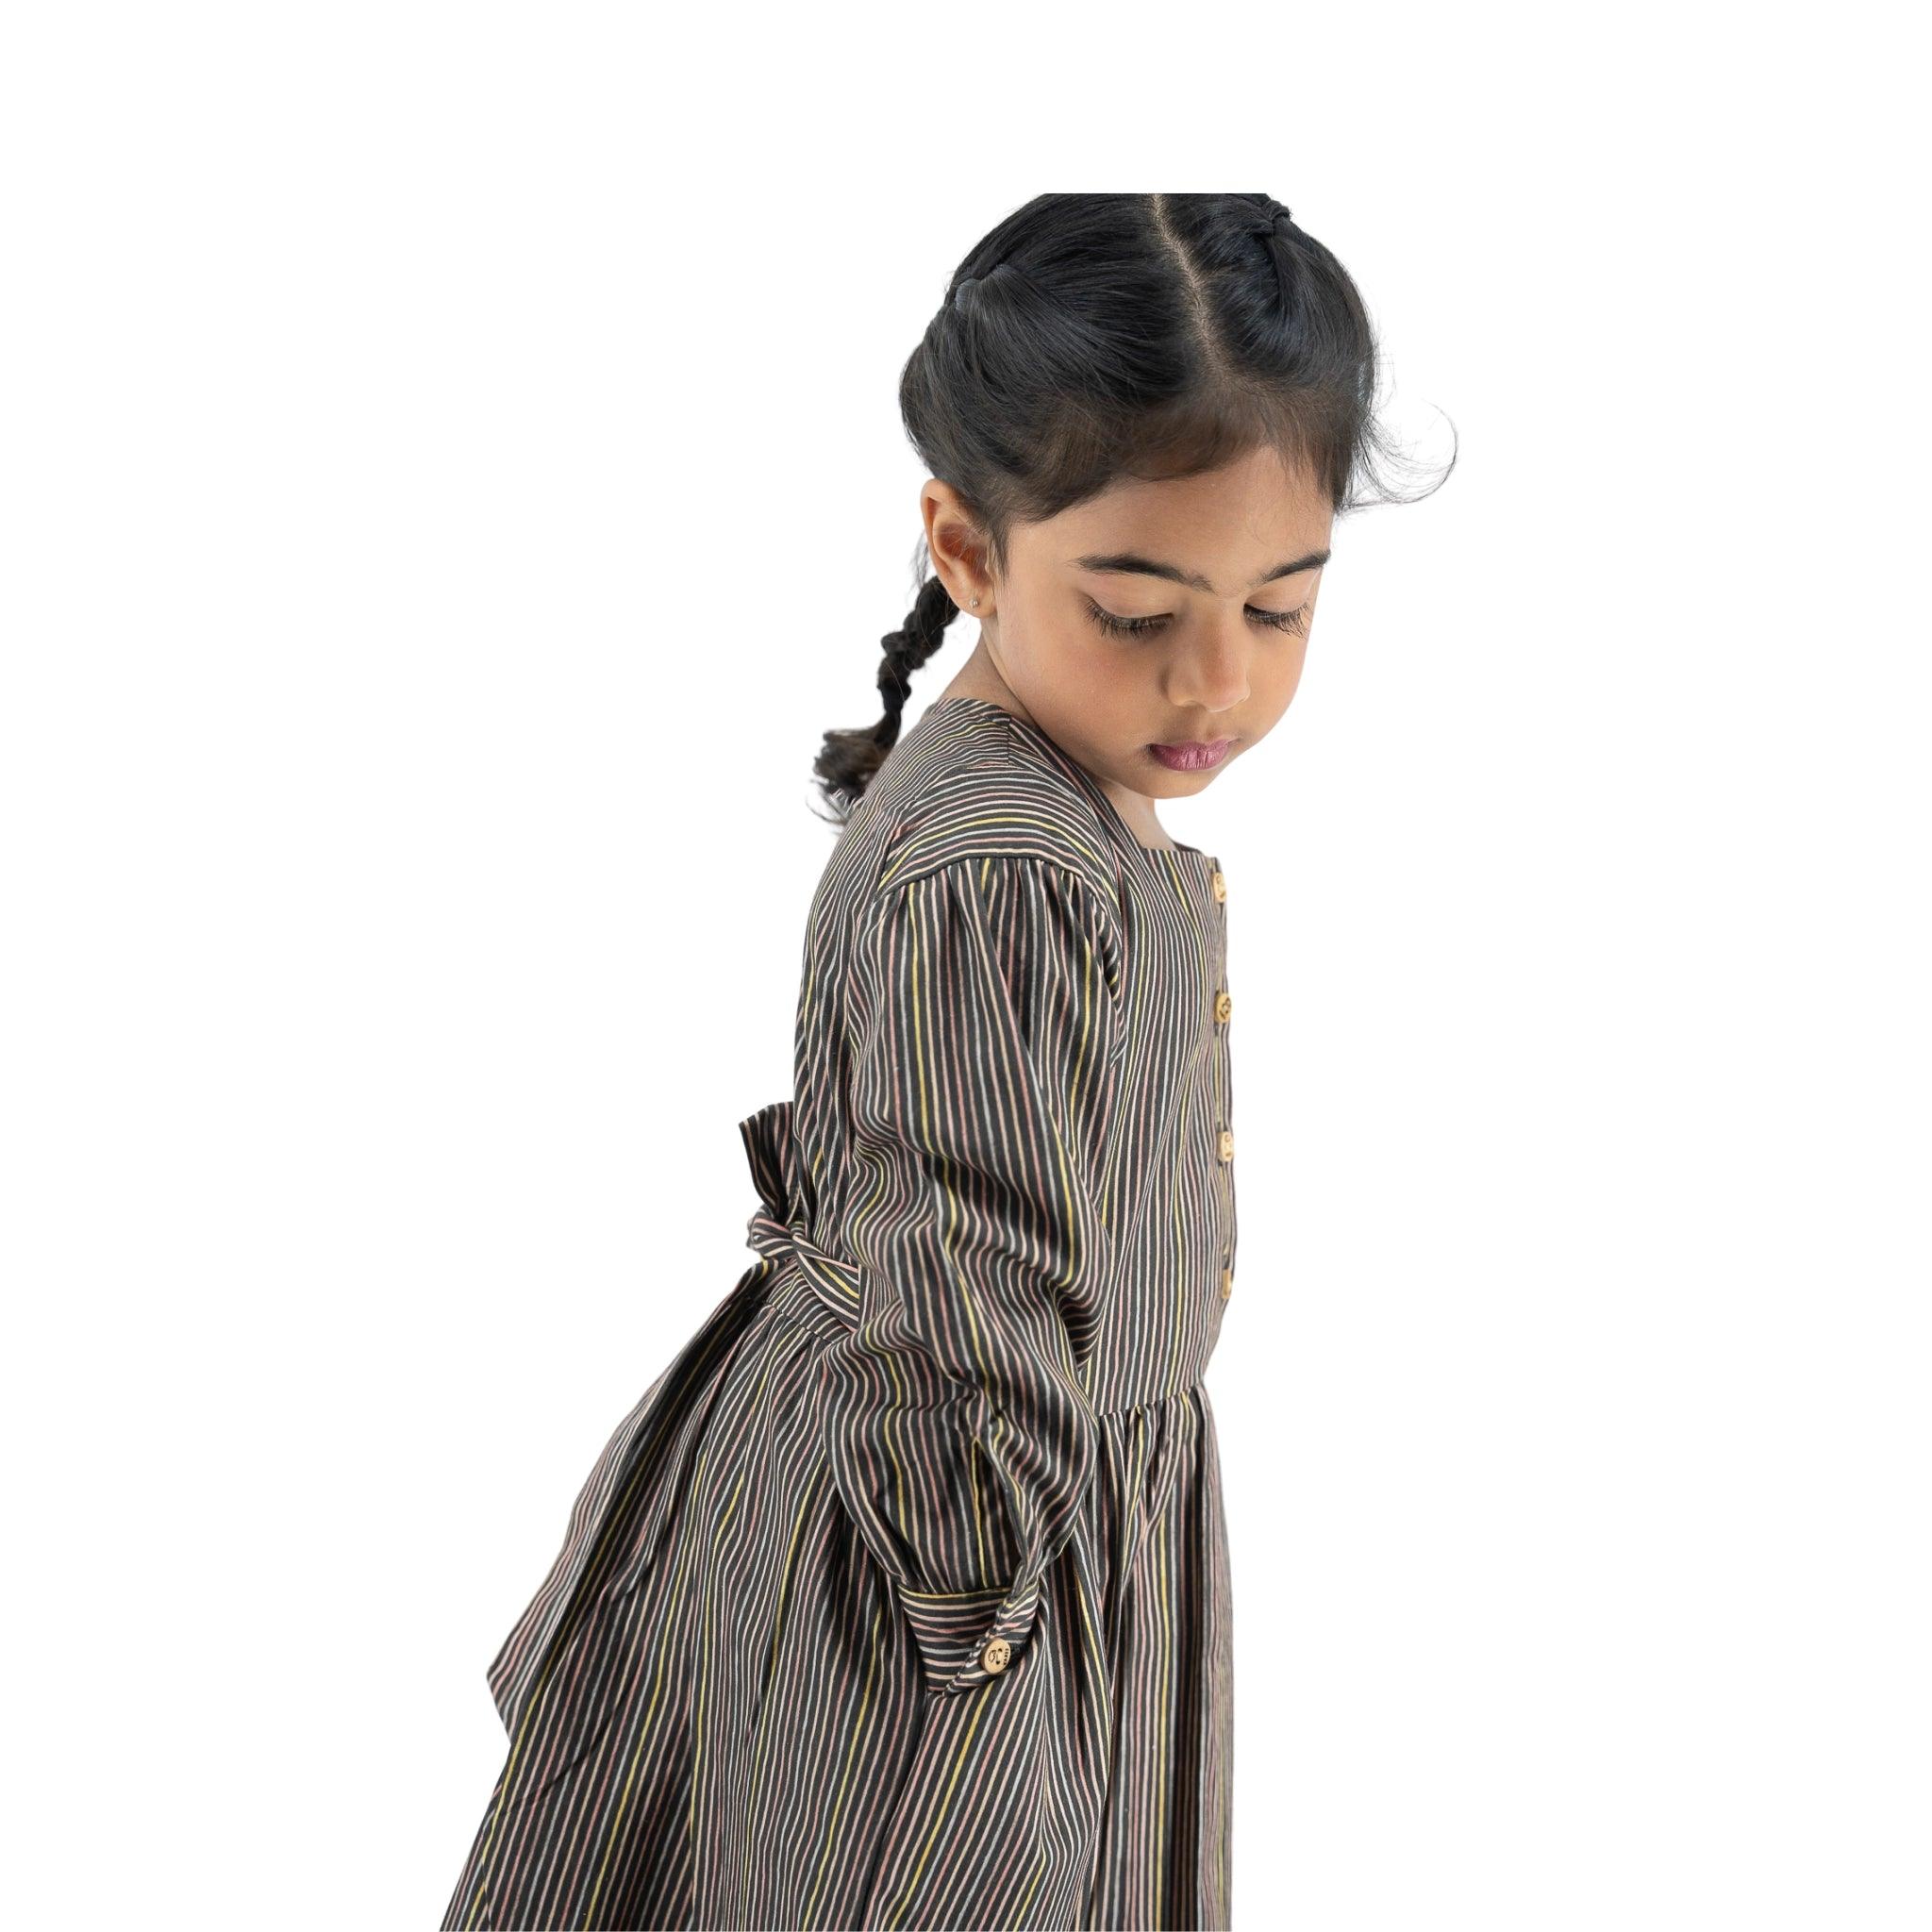 Young girl with braided hair, wearing a Karee Black Striped Full sleeve Cotton Dress, looking downward to her left side, isolated on white background.